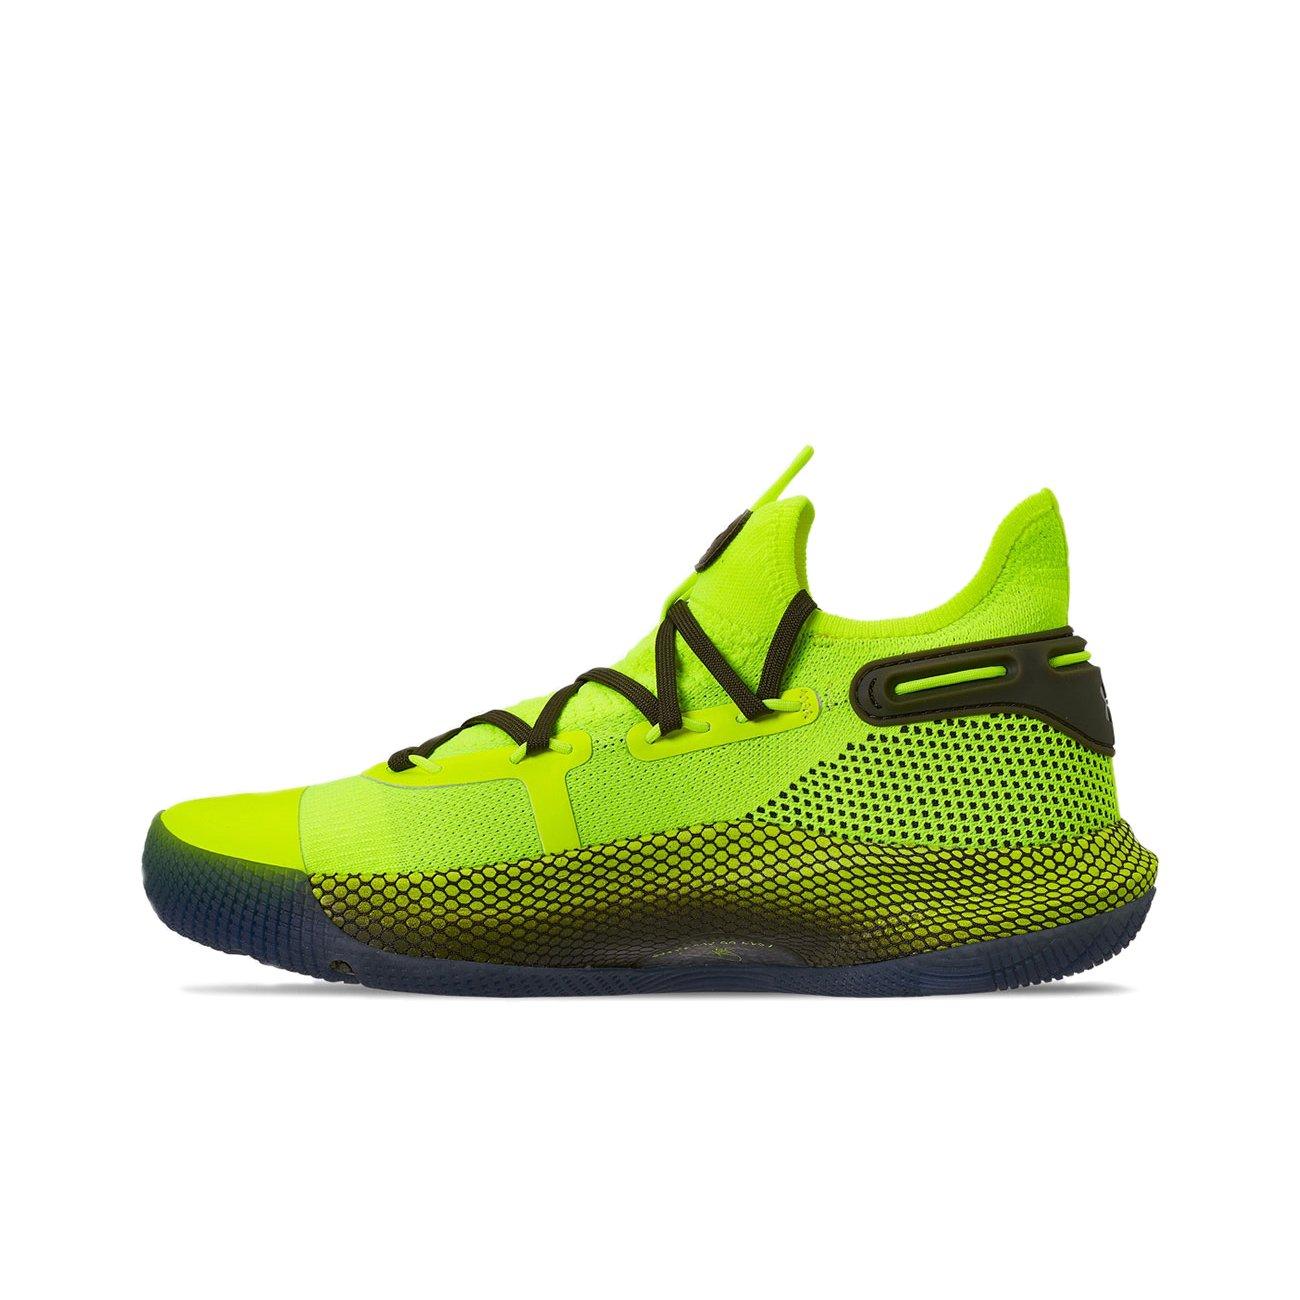 curry 6 yellow